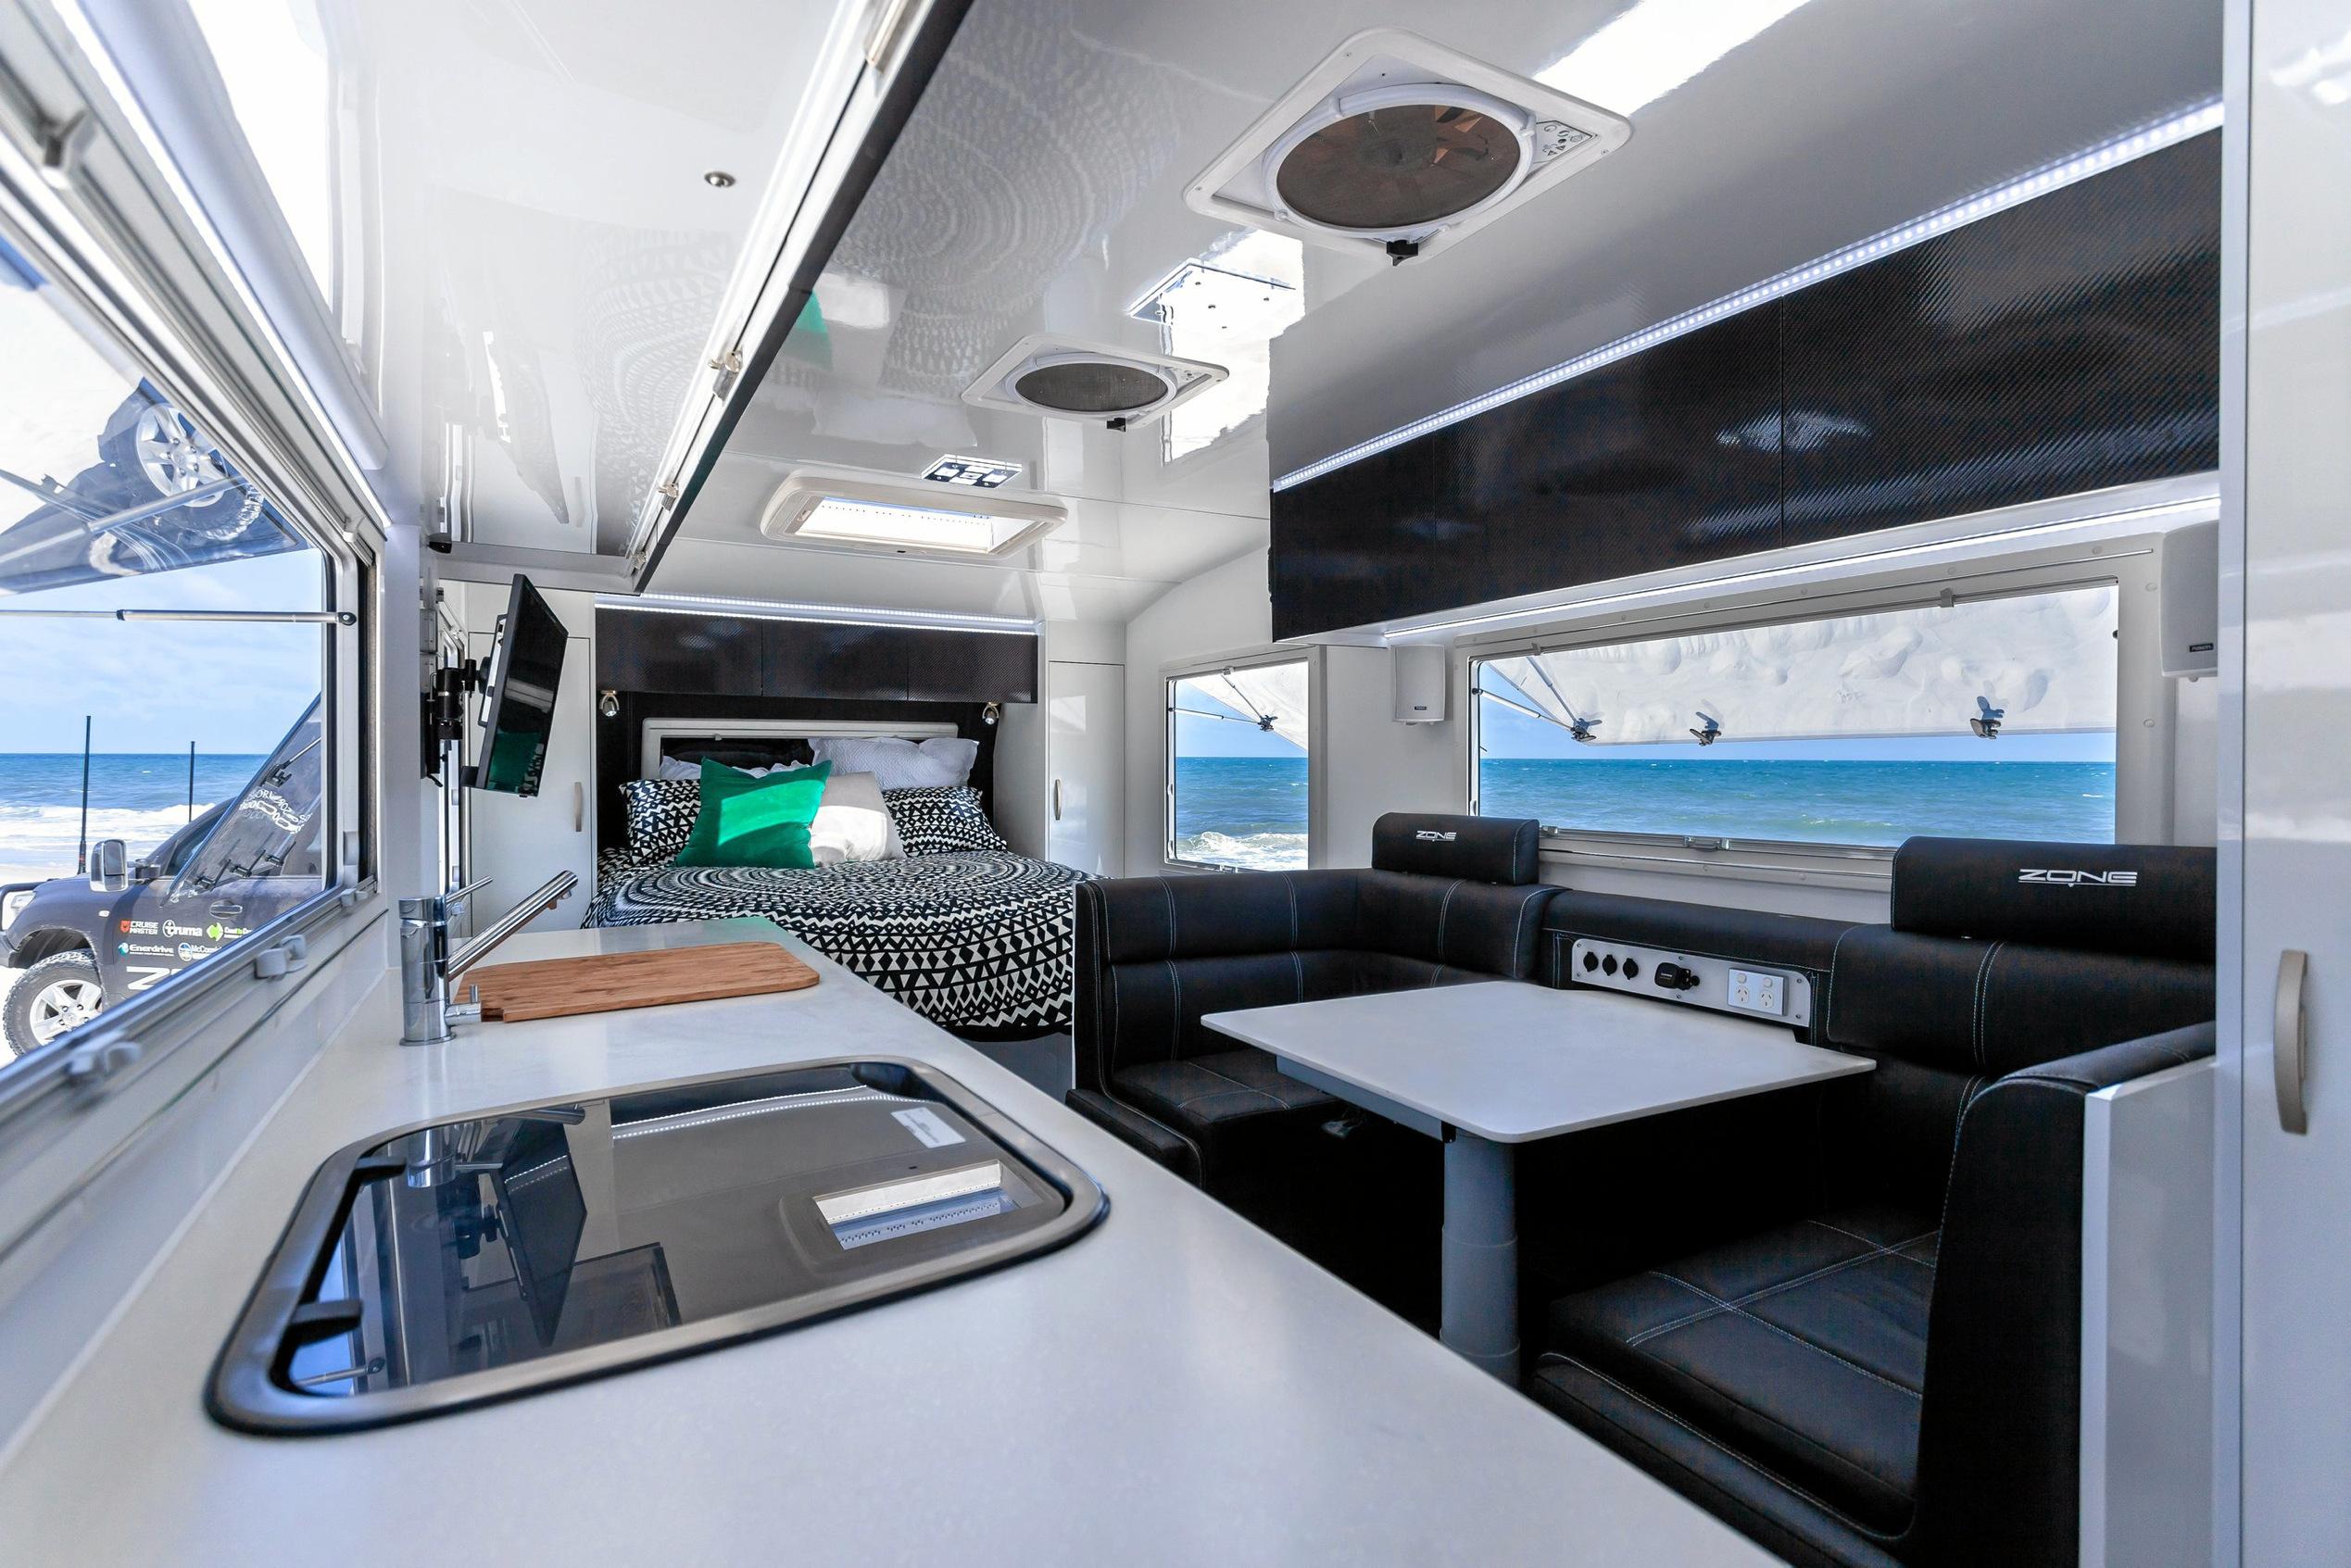 The Zone RV Summit Series range is made from carbon fibre, with prices starting from $173,000.